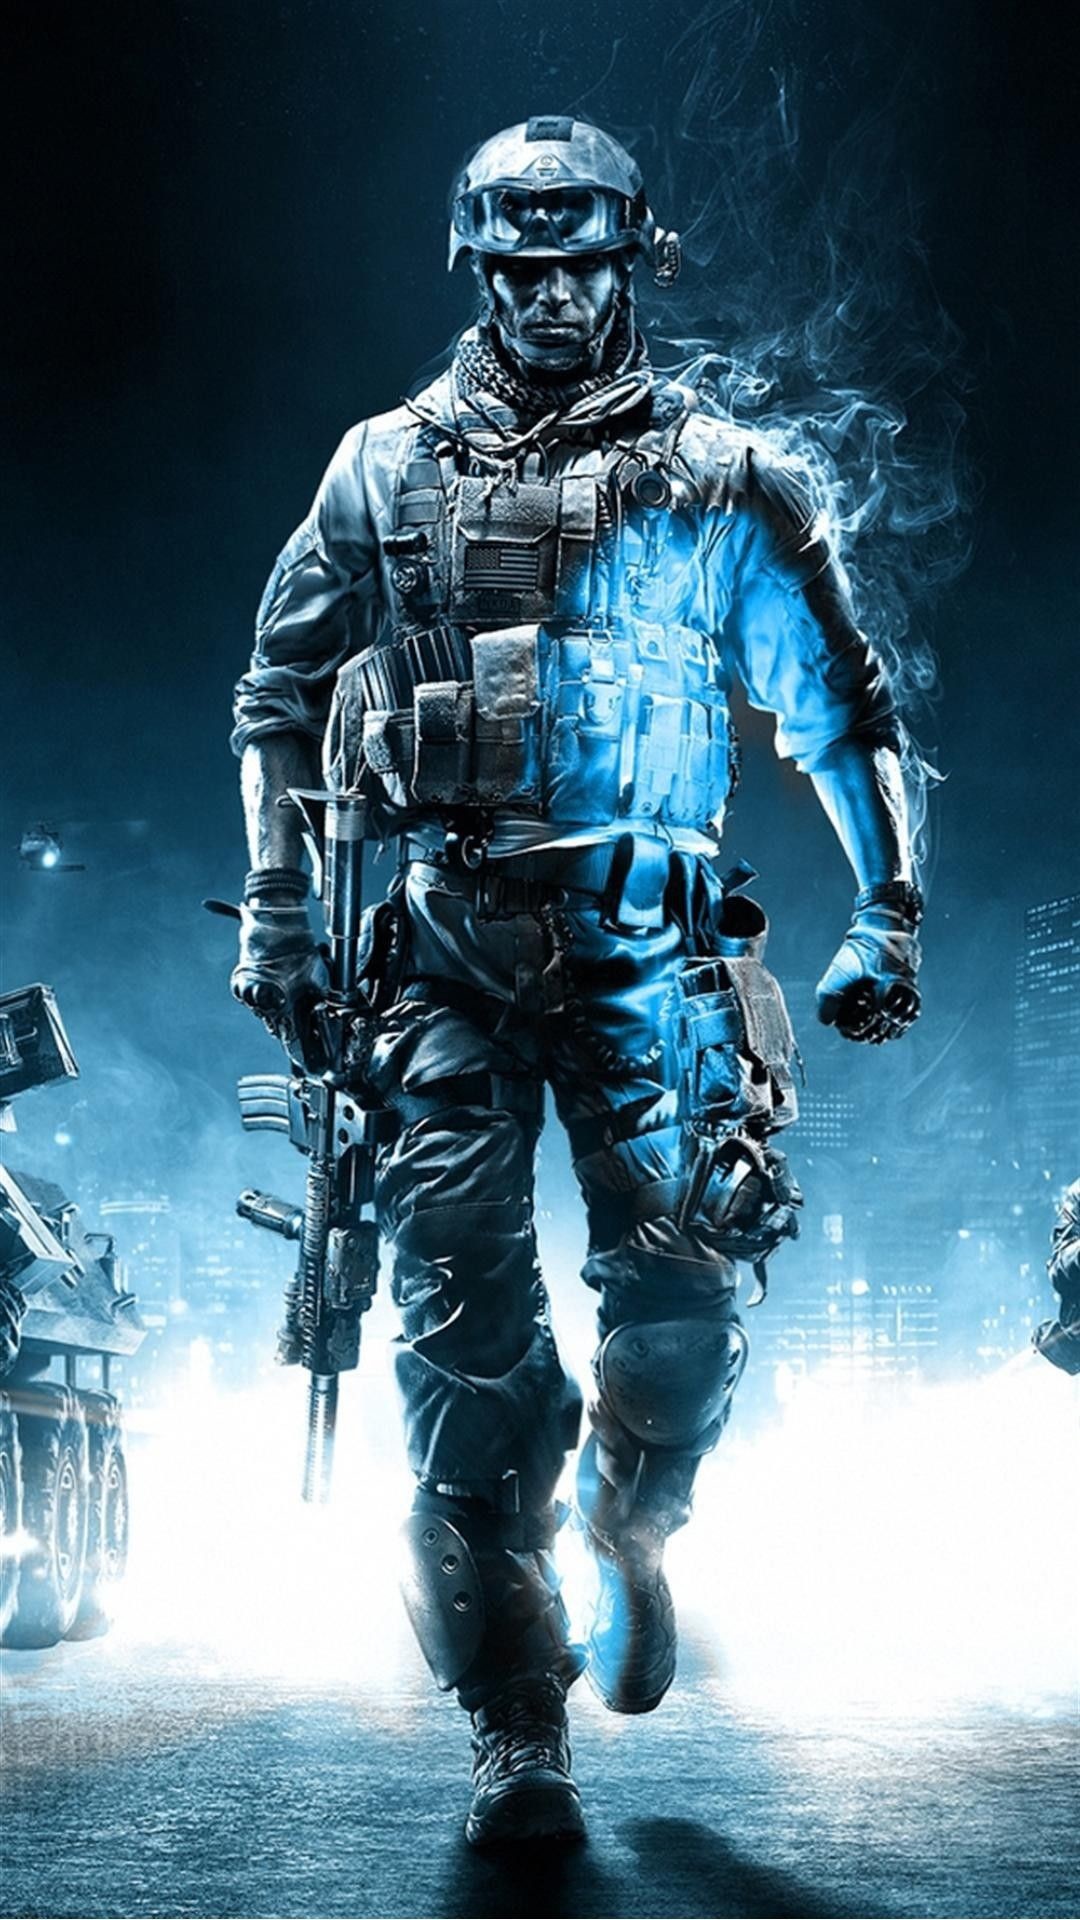 1080x1920 Call of Duty Ghosts Smartphone Wallpaper and Lockscreen HD Check more at  https://